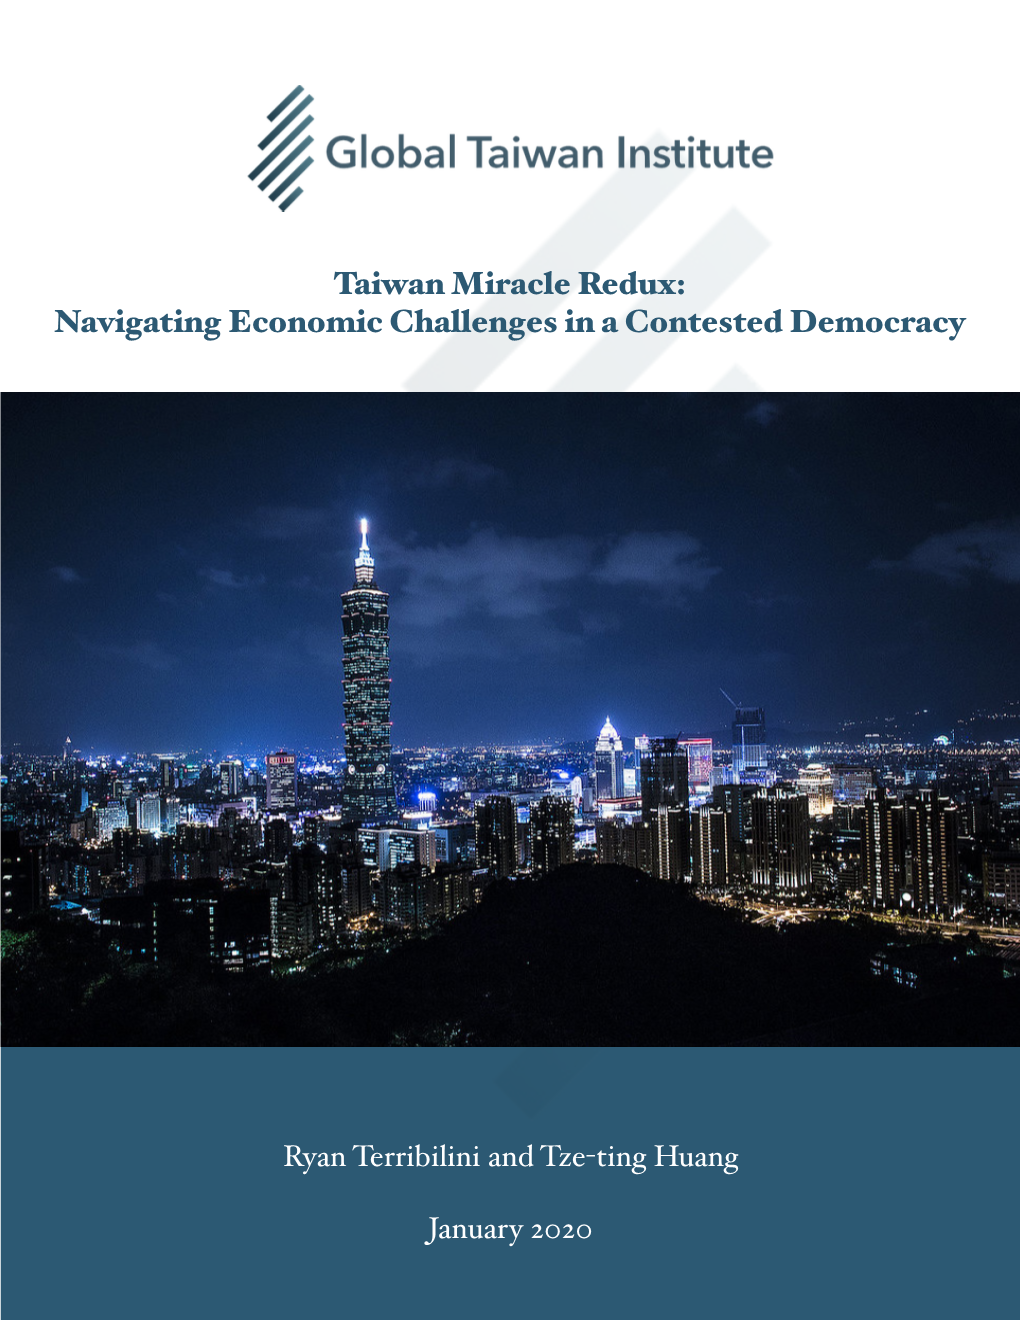 Navigating Economic Challenges in a Contested Democracy